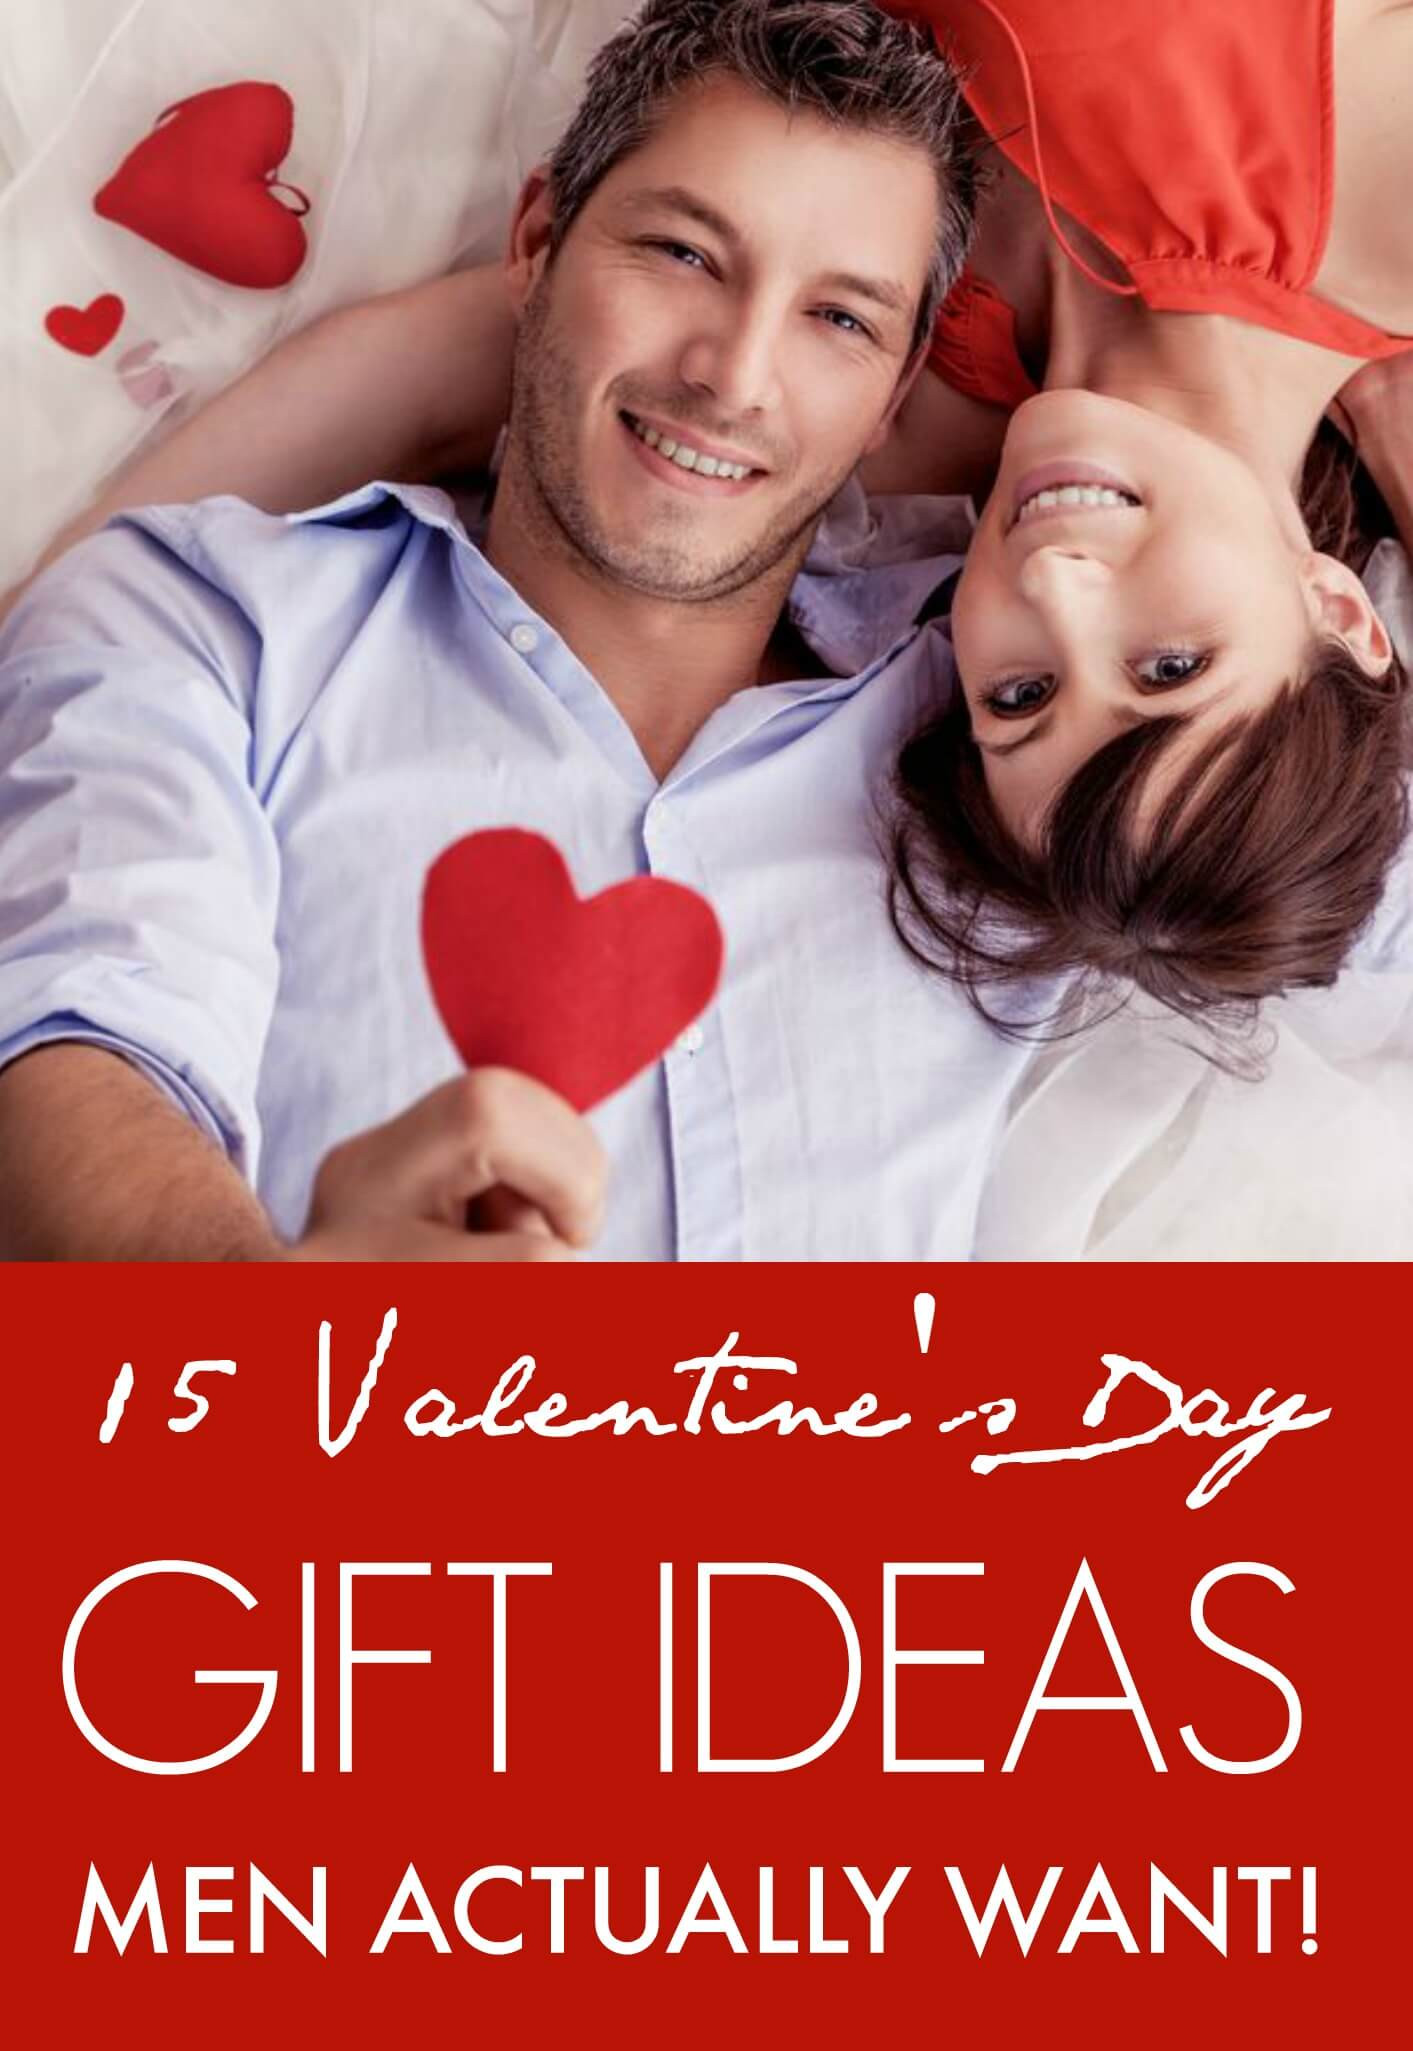 Gift Ideas For Men On Valentines Day
 15 Valentine’s Day Gift ideas Men Actually Want